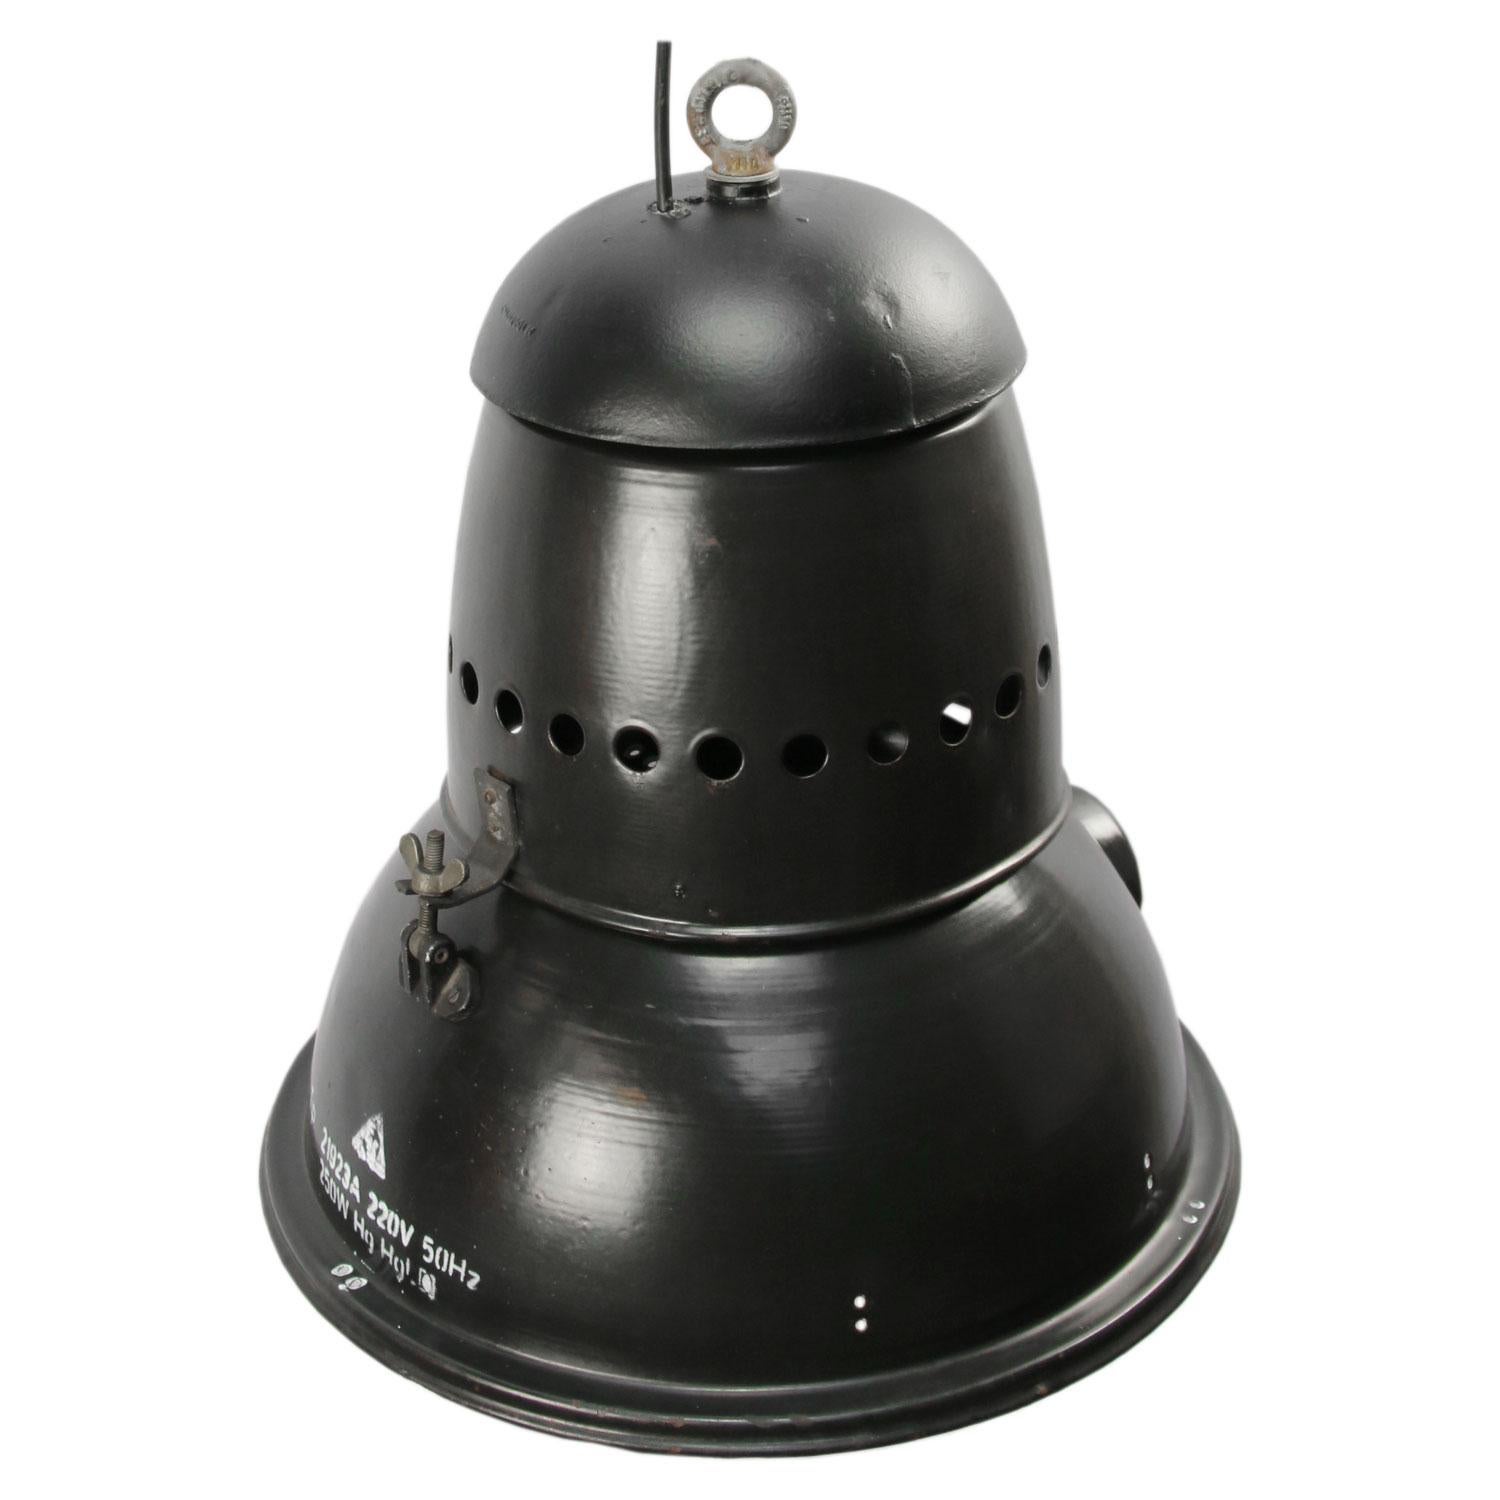 Black enamel Industrial lamp. White interior cast iron top.

Measures: Weight 7.5 kg / 16.5 lb

Priced per individual item. All lamps have been made suitable by international standards for incandescent light bulbs, energy-efficient and LED